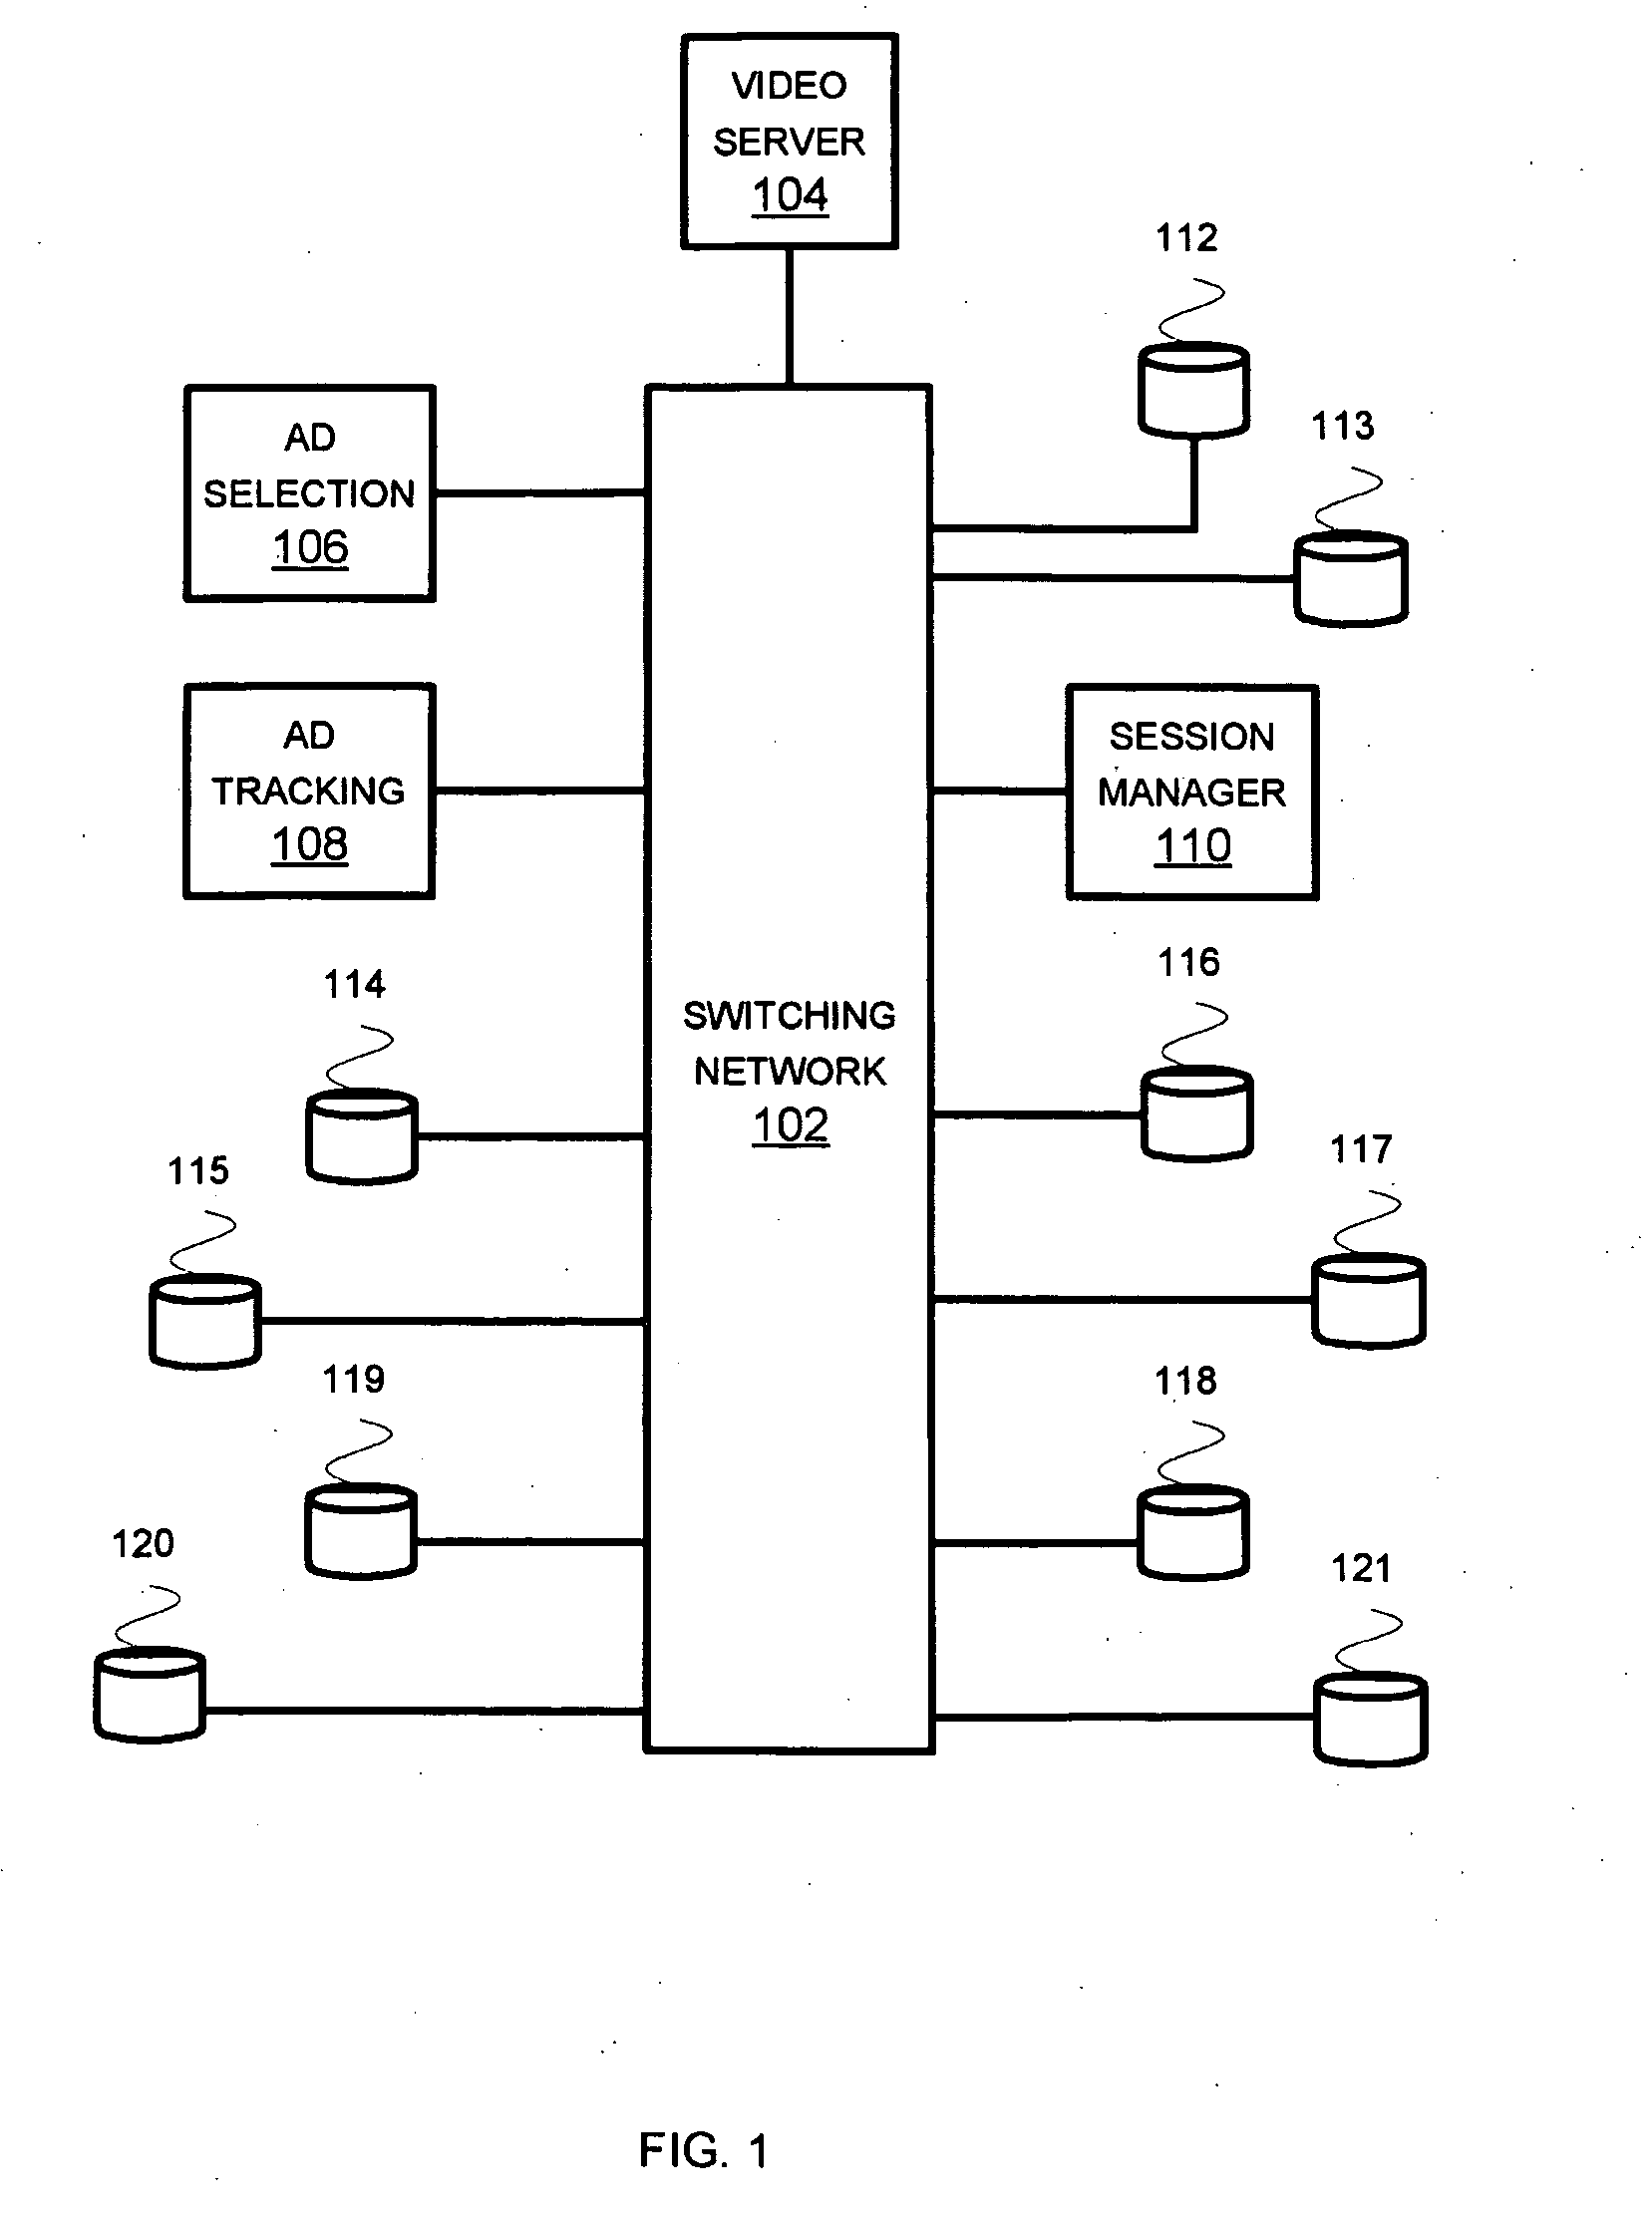 Ad insertion in switched broadcast network